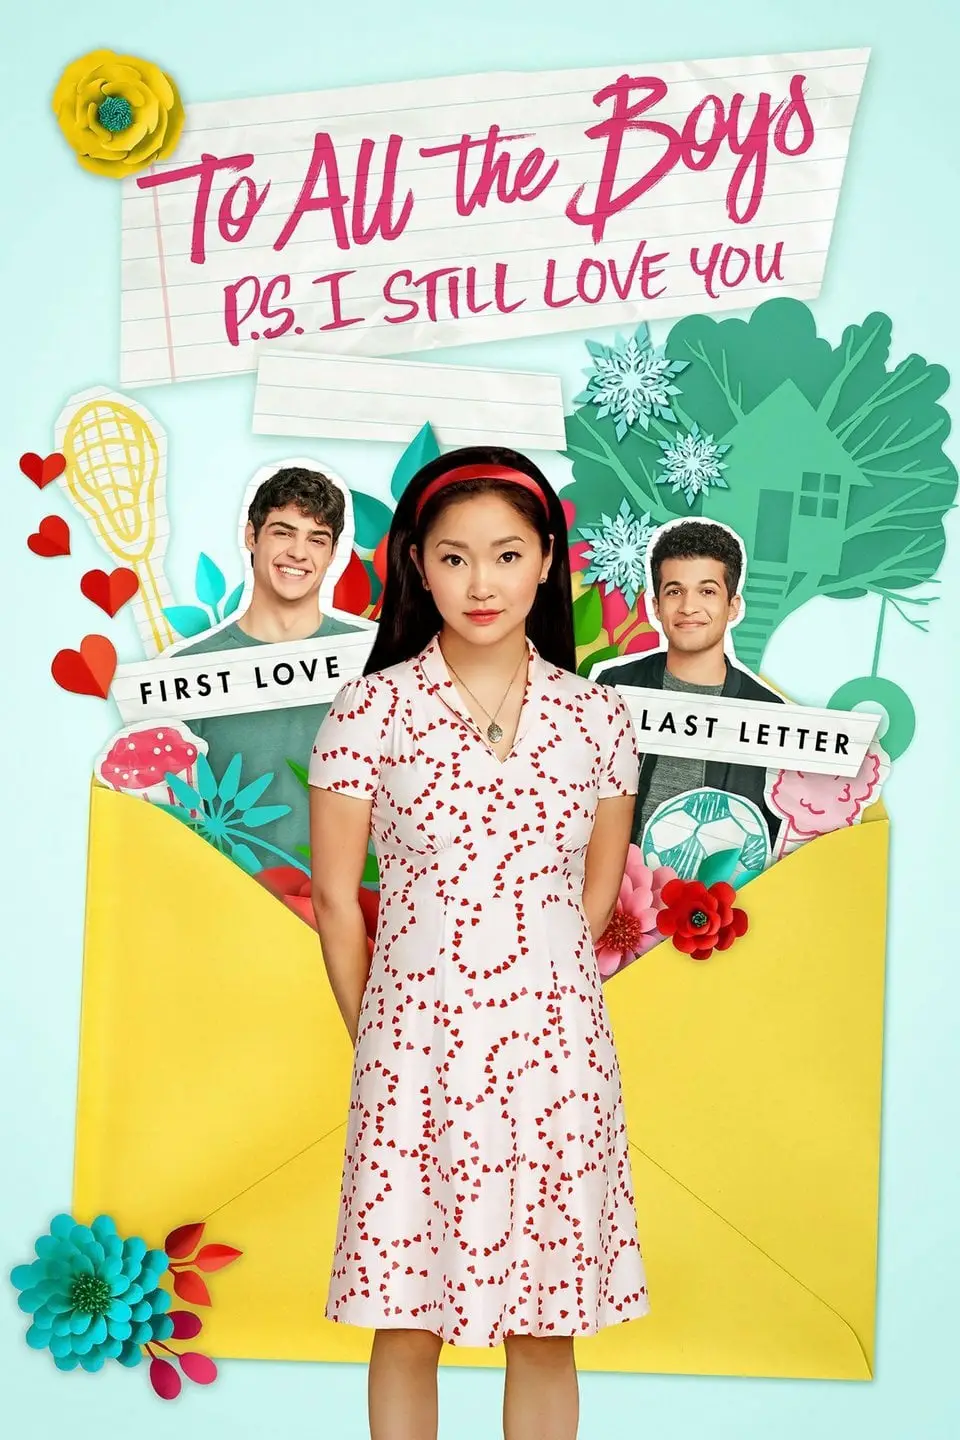 You are currently viewing To All the Boys: P.S. I Still Love You (only on Netflix)